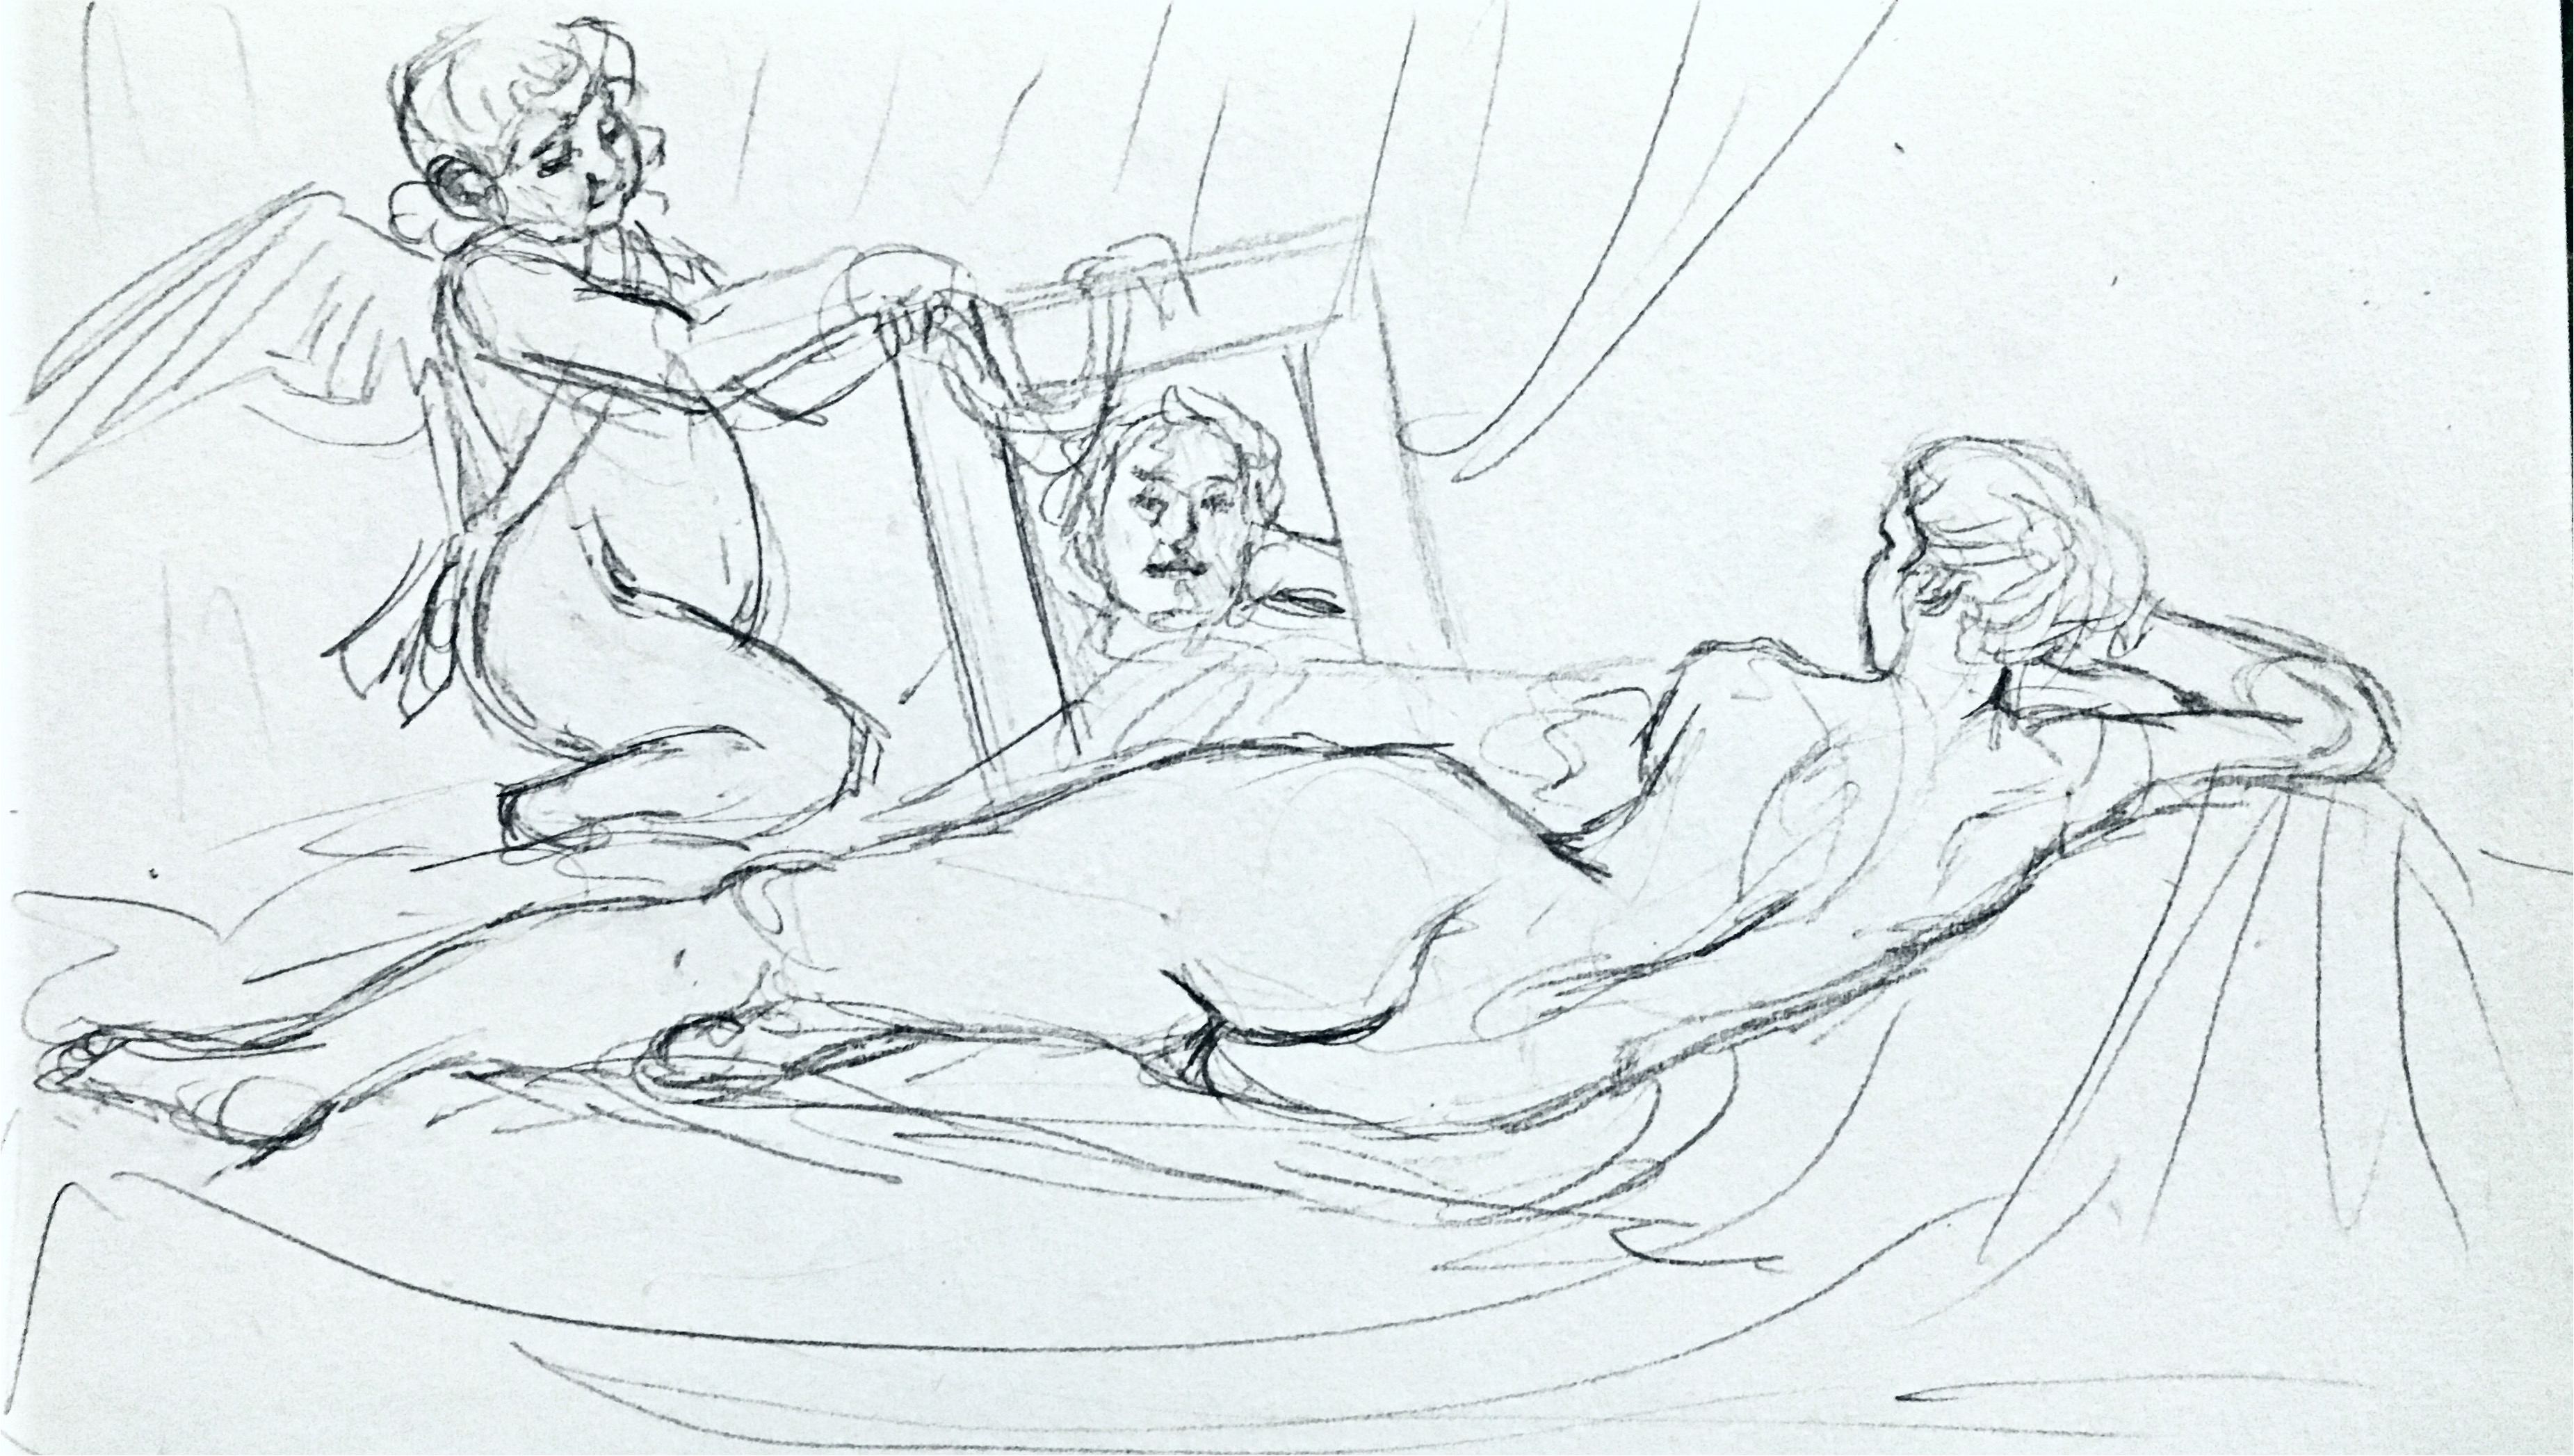 pencil sketch of nude woman reclining, looking into a mirror held by a cherub